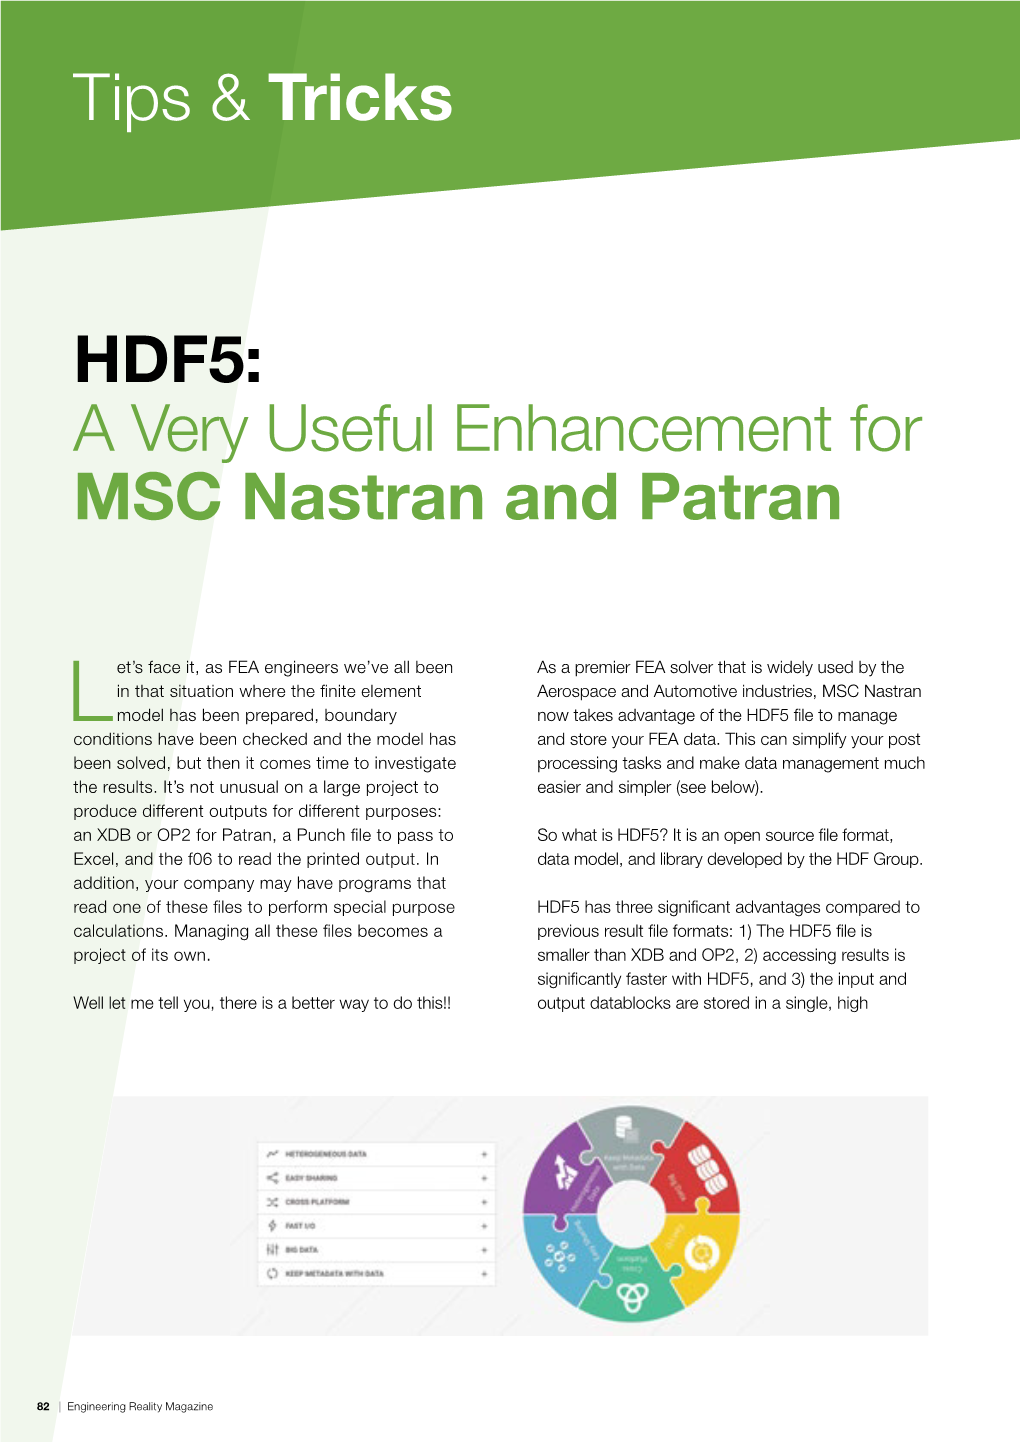 A Very Useful Enhancement for MSC Nastran and Patran